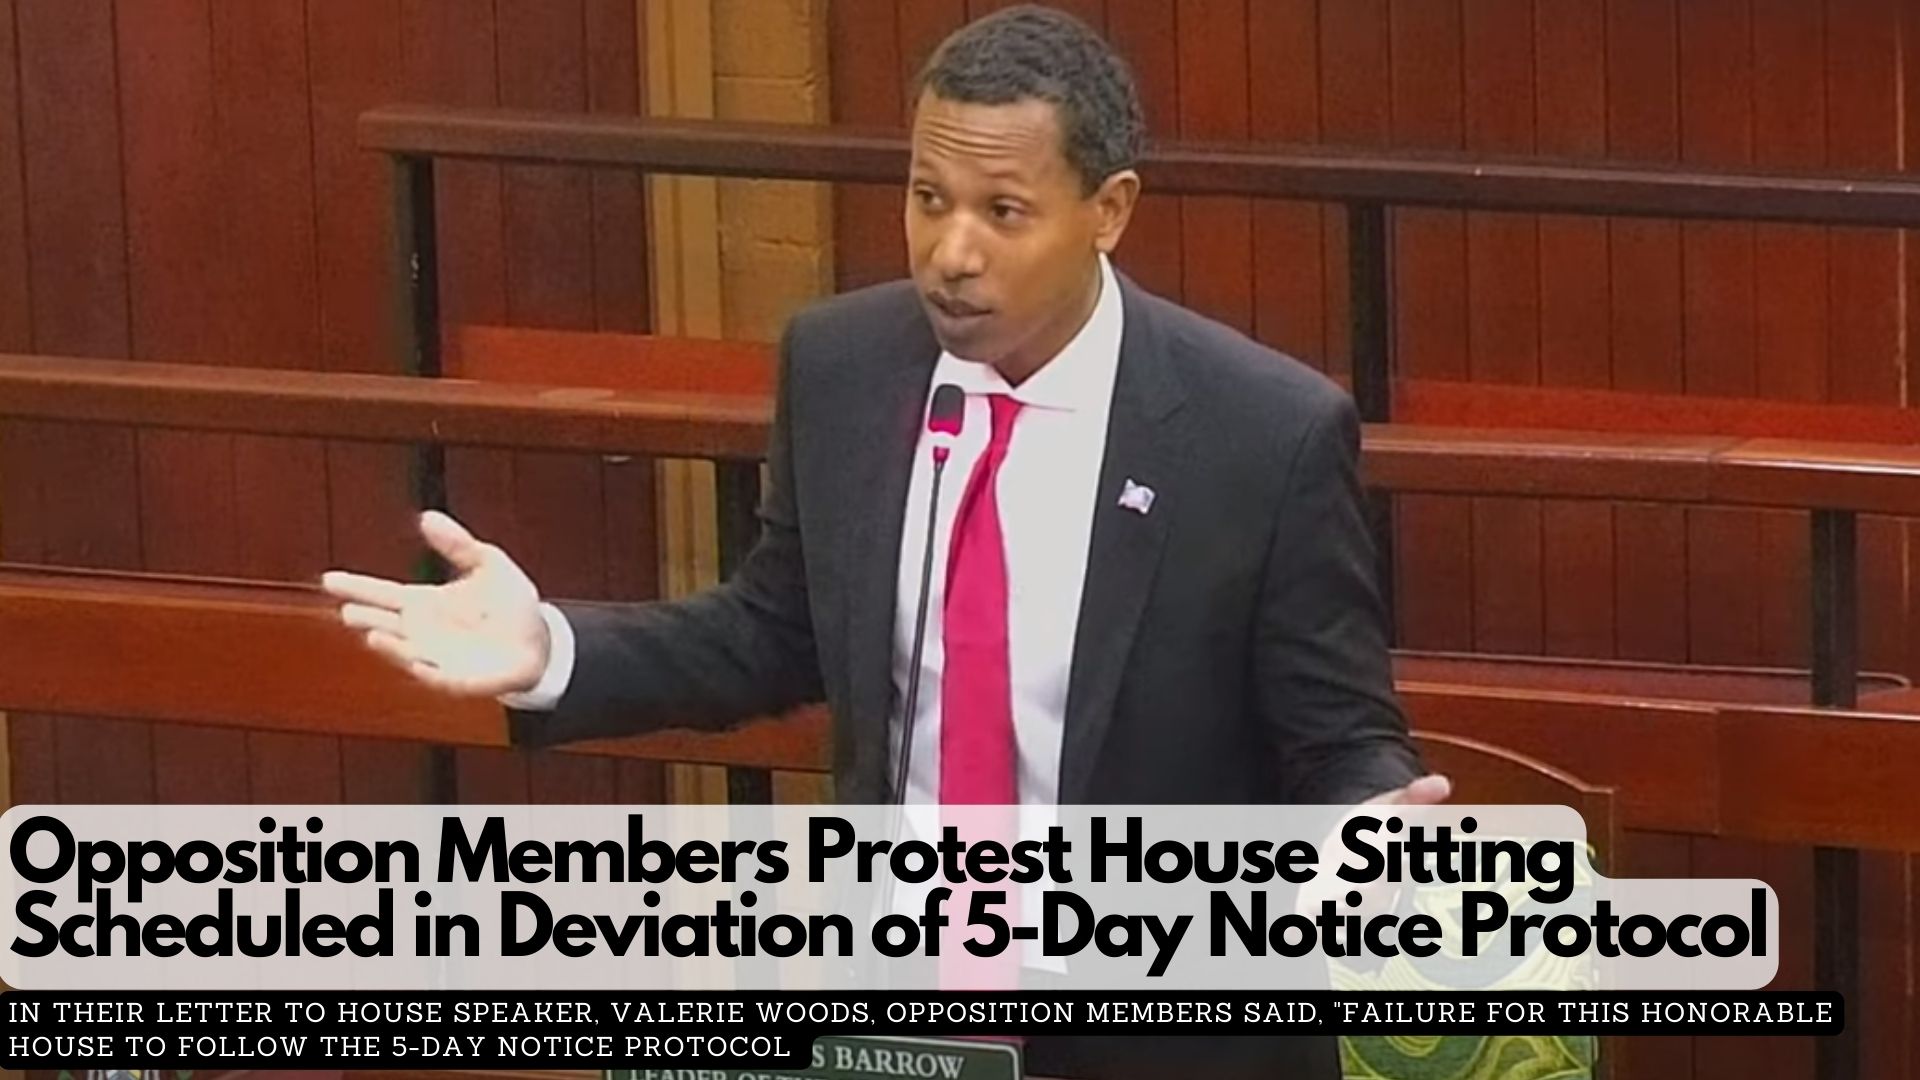 Opposition Members Protest House Sitting Scheduled in Deviation of 5-Day Notice Protocol